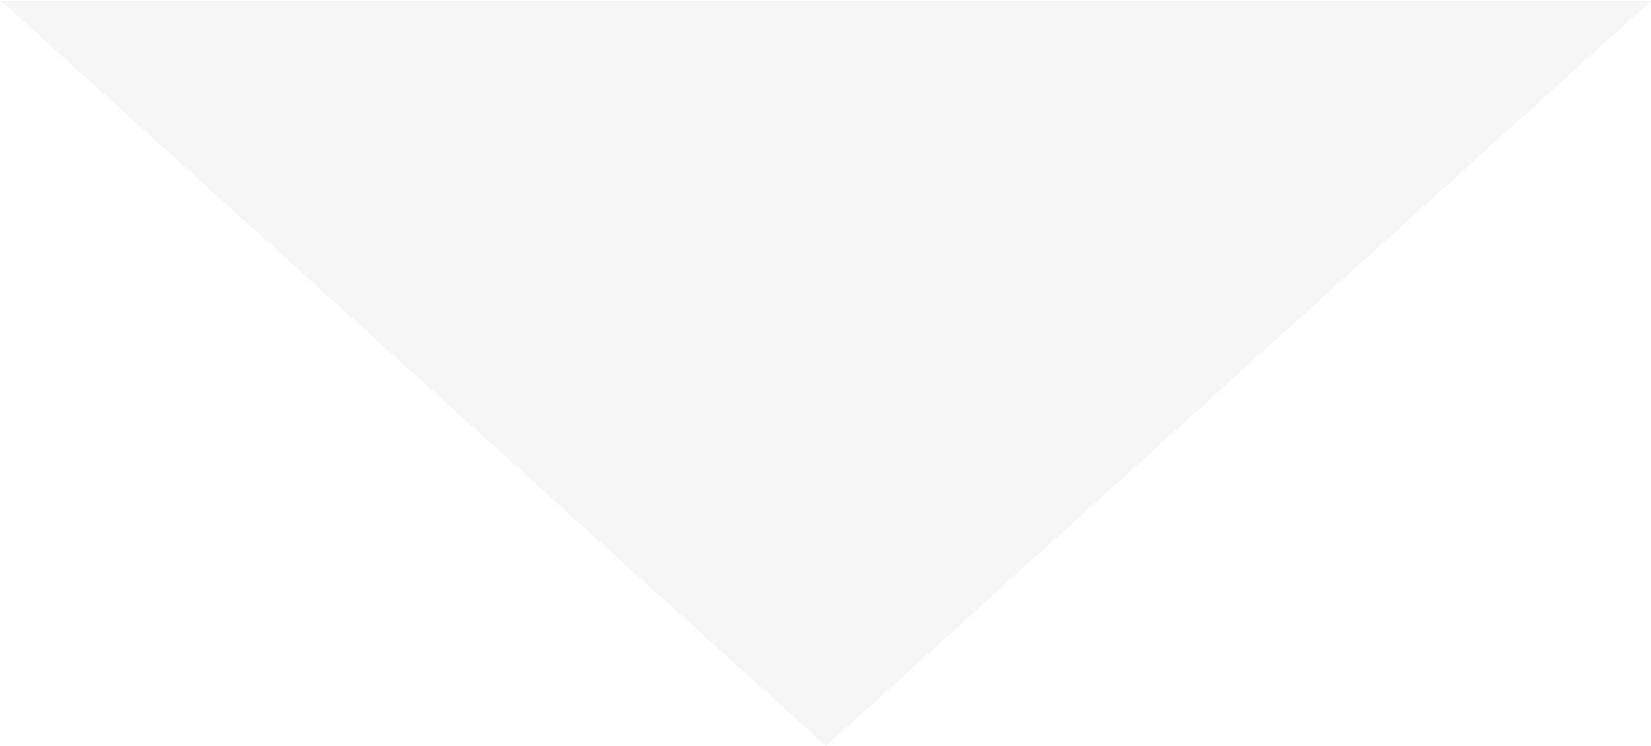 A Black Triangle With A Black Background